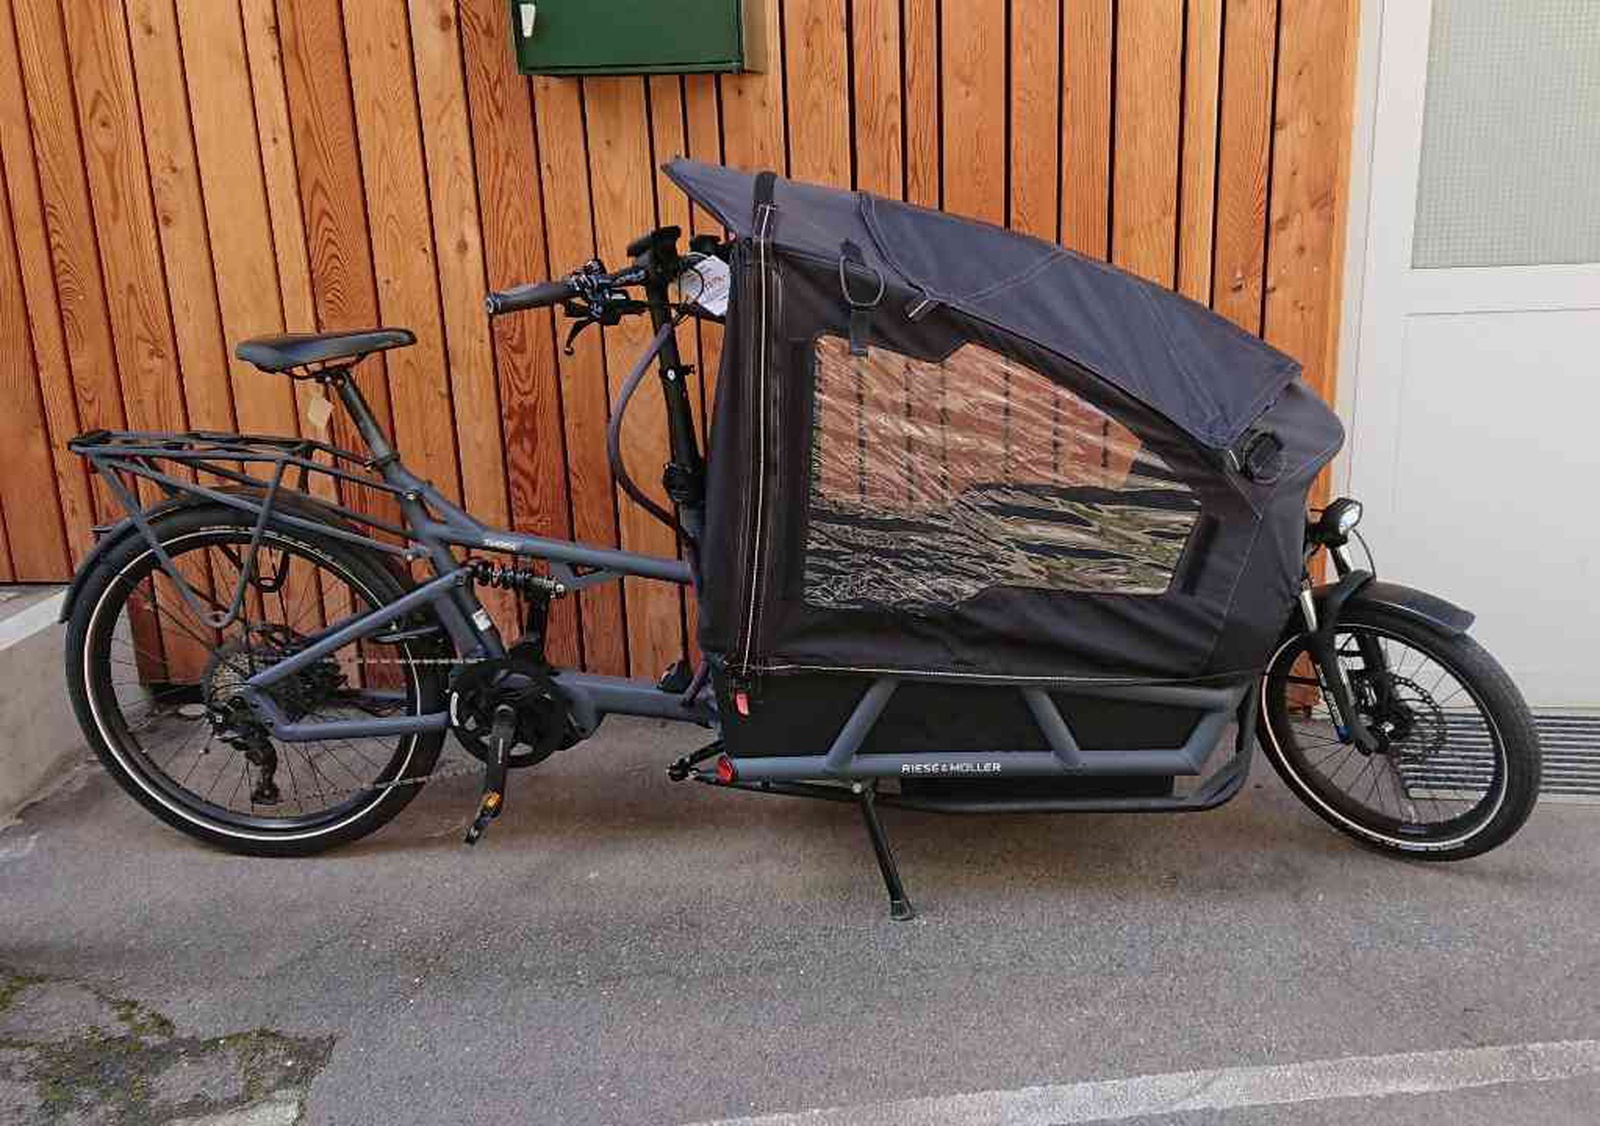 Load 75 touring 1000Wh Intuvia RX (vélo test)